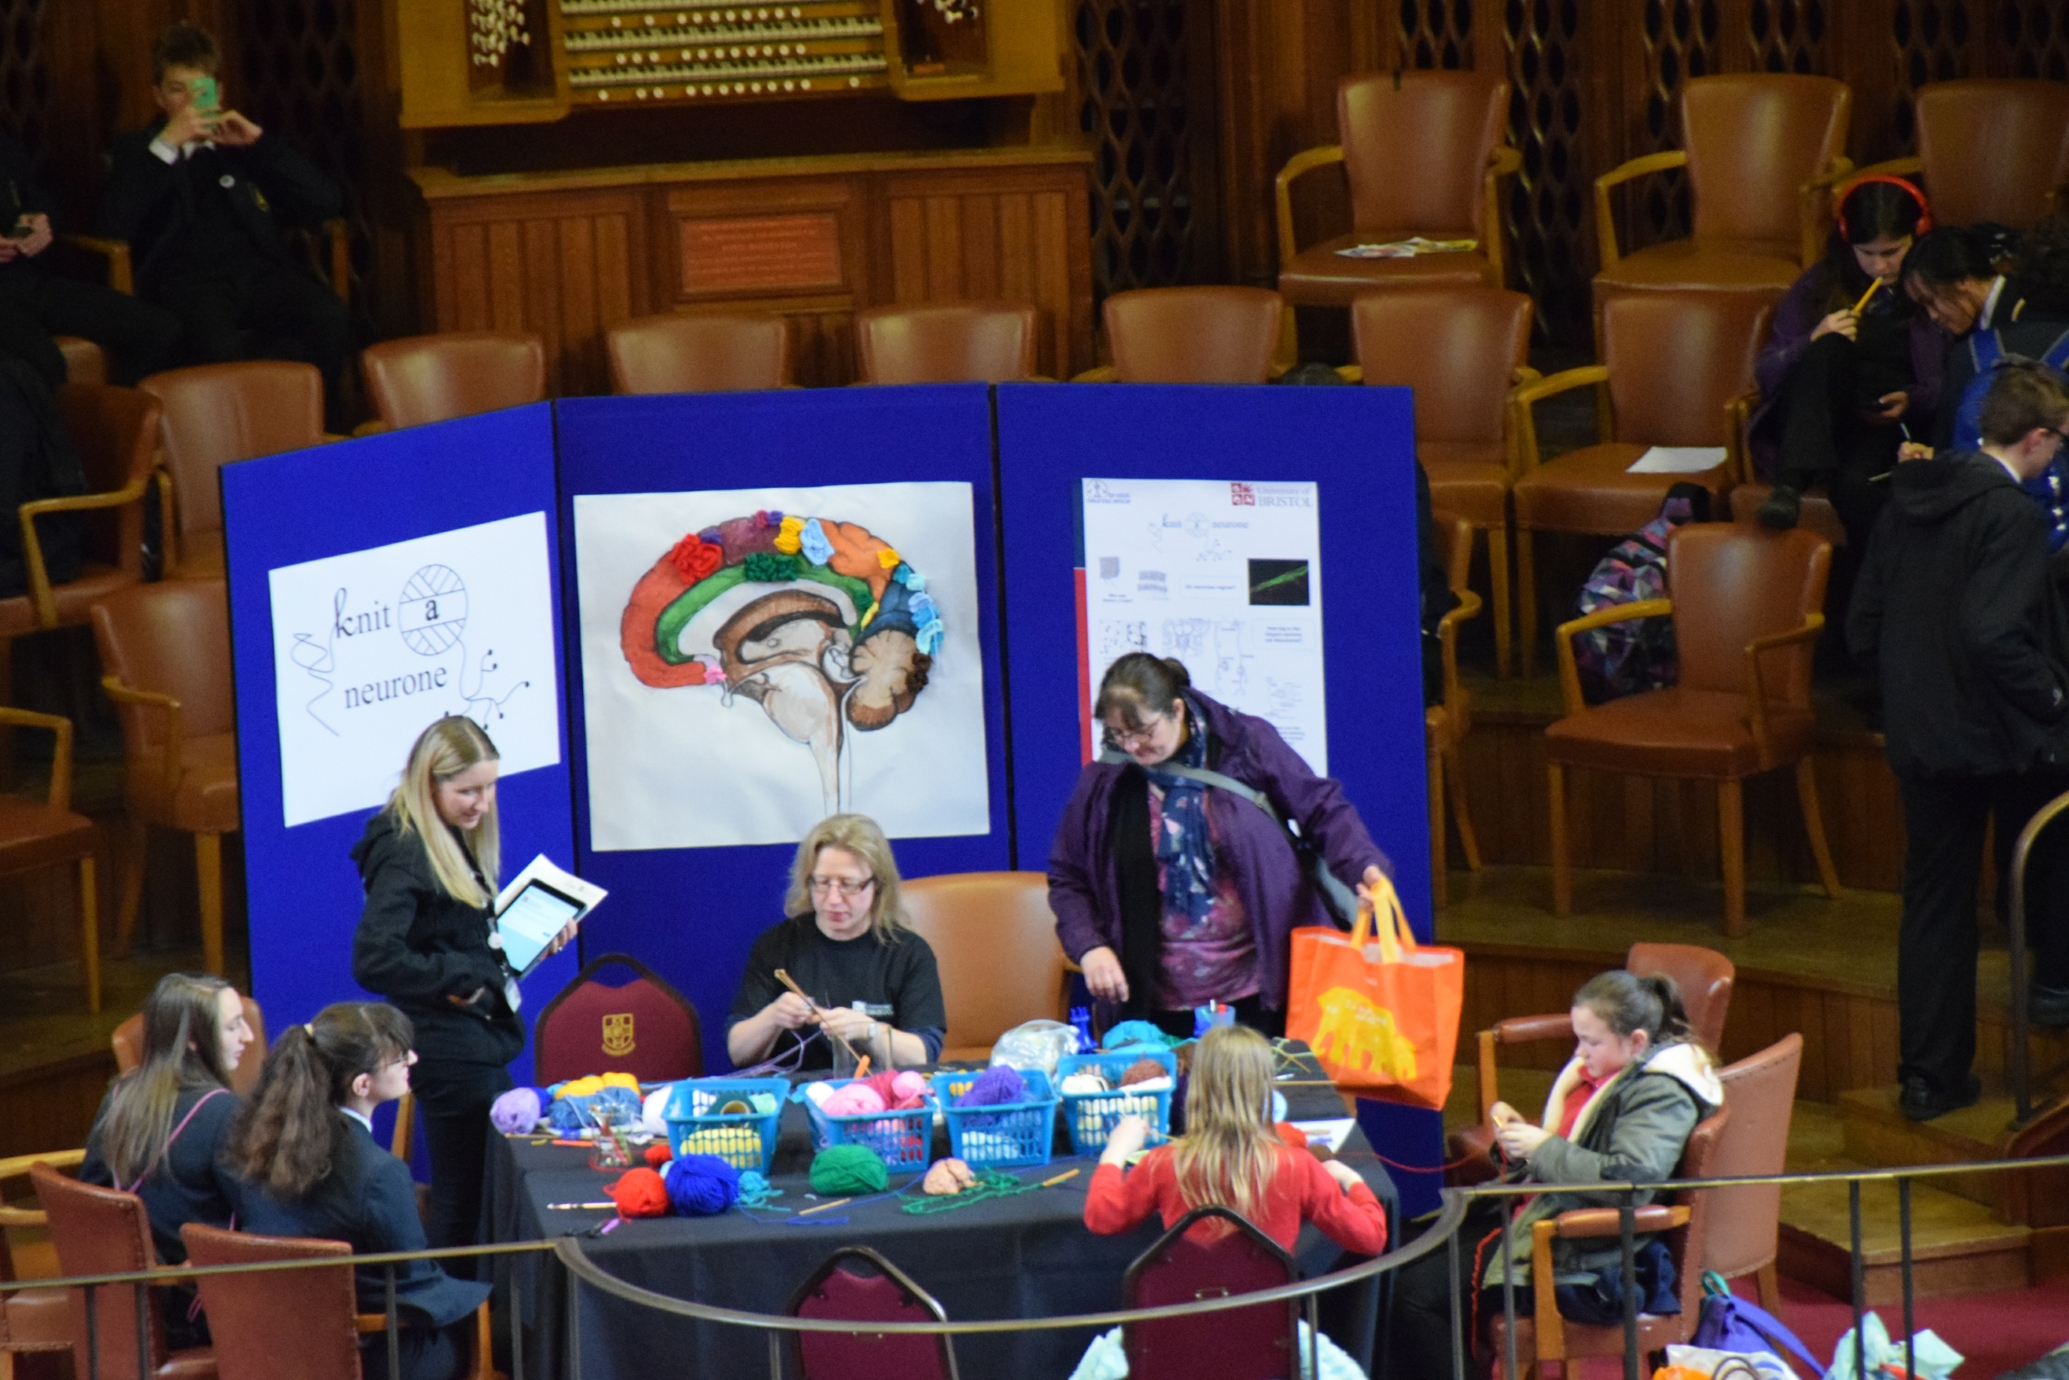 Knit a neurone activity stall